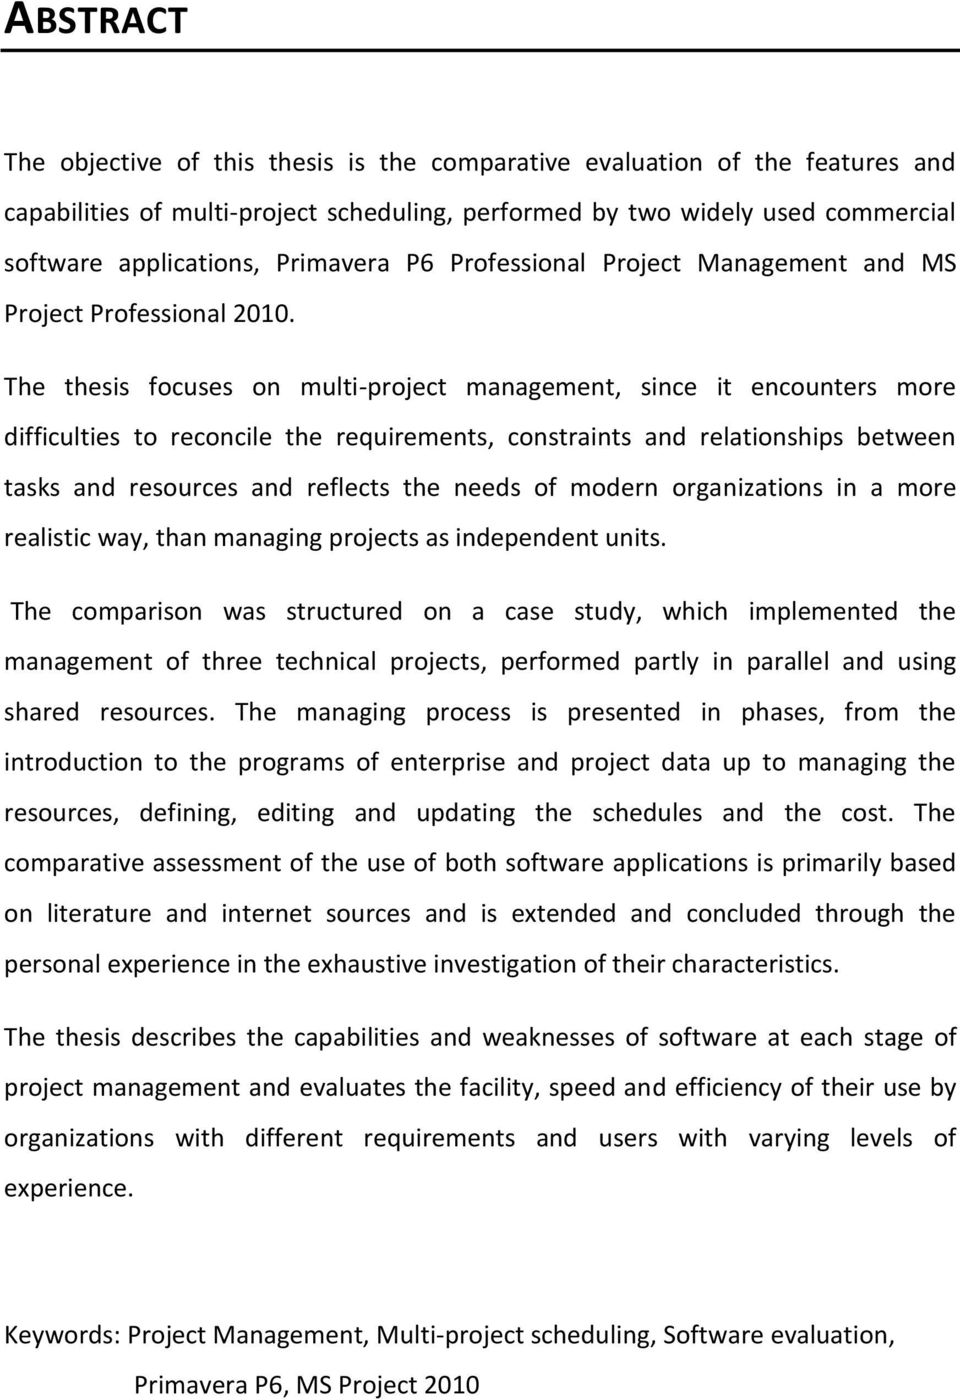 The thesis focuses on multi-project management, since it encounters more difficulties to reconcile the requirements, constraints and relationships between tasks and resources and reflects the needs